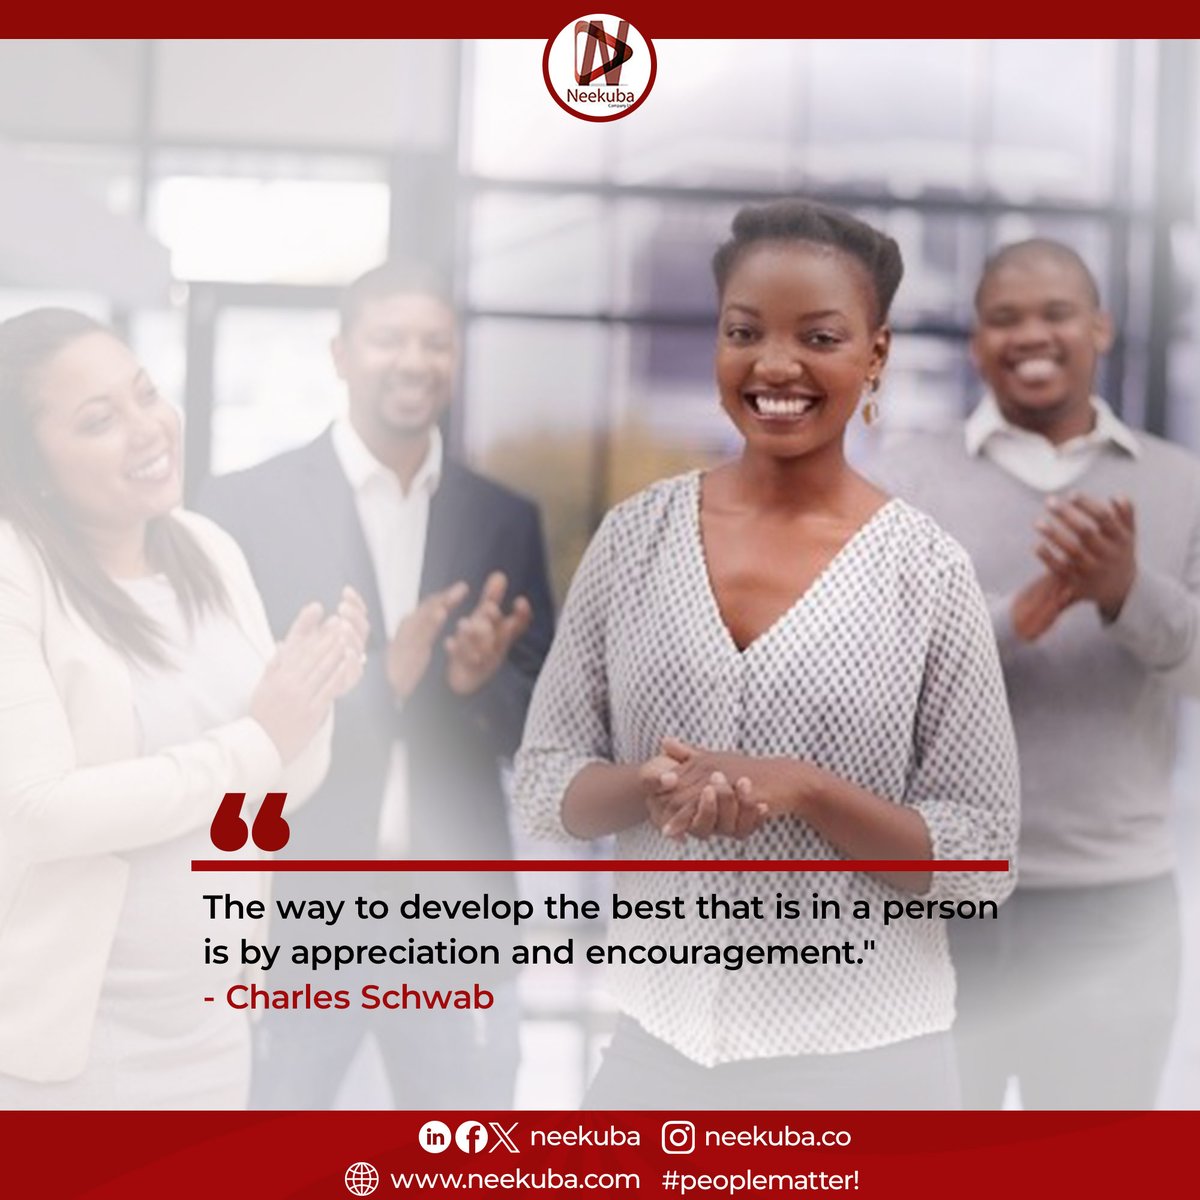 The way to develop the best that is in a person is by appreciation and encouragement.
- Charles Schwab

#neekuba #peoplematter #develop #appreciation #encouragement #friday